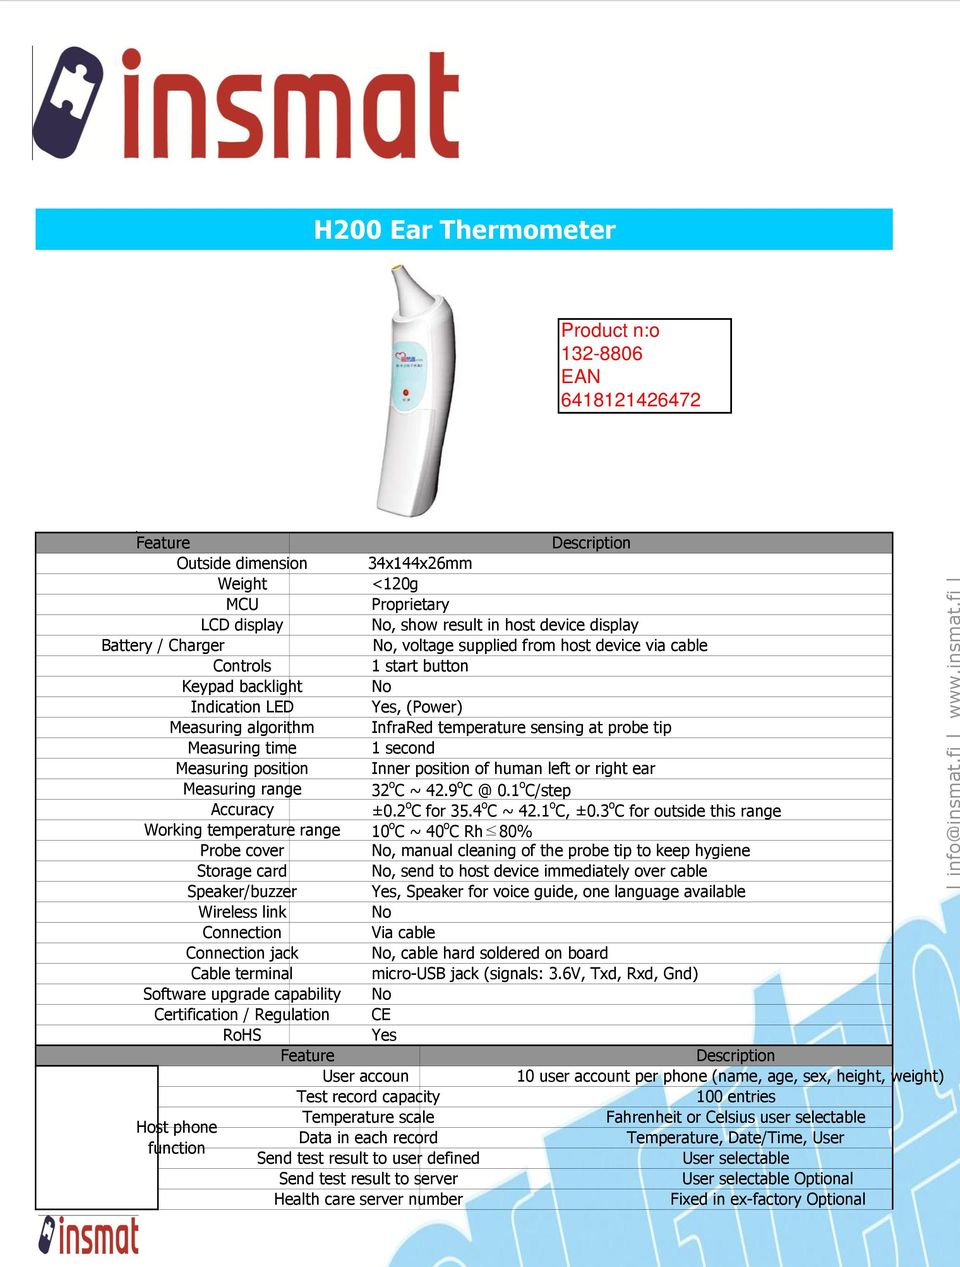 com.hk Web: www.tvcom.com.hk H200 Ear Thermometer Outside dimension 34x144x26mm Weight <120g LCD display, show result in host device display Battery / Charger, voltage supplied from host device via